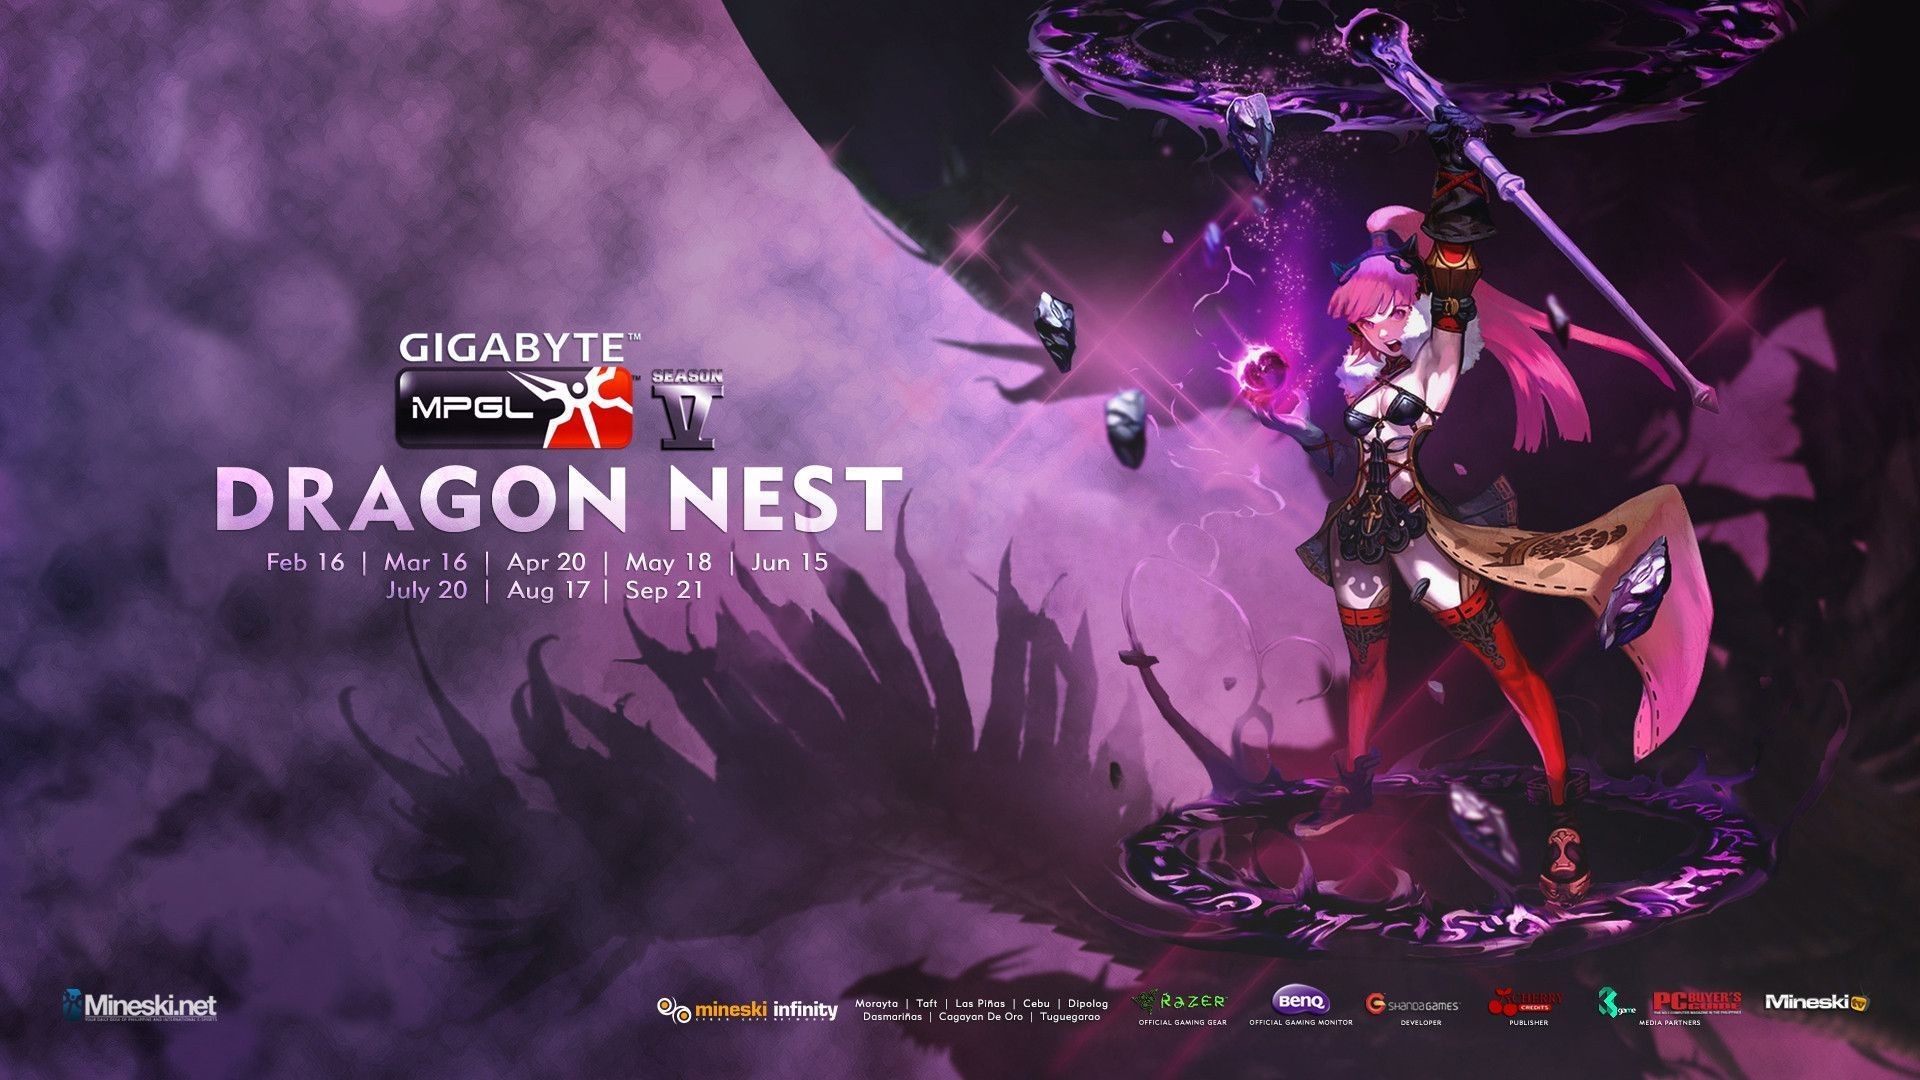 1920x1080 Search Results for “dragon nest wallpaper desktop” – Adorable Wallpapers